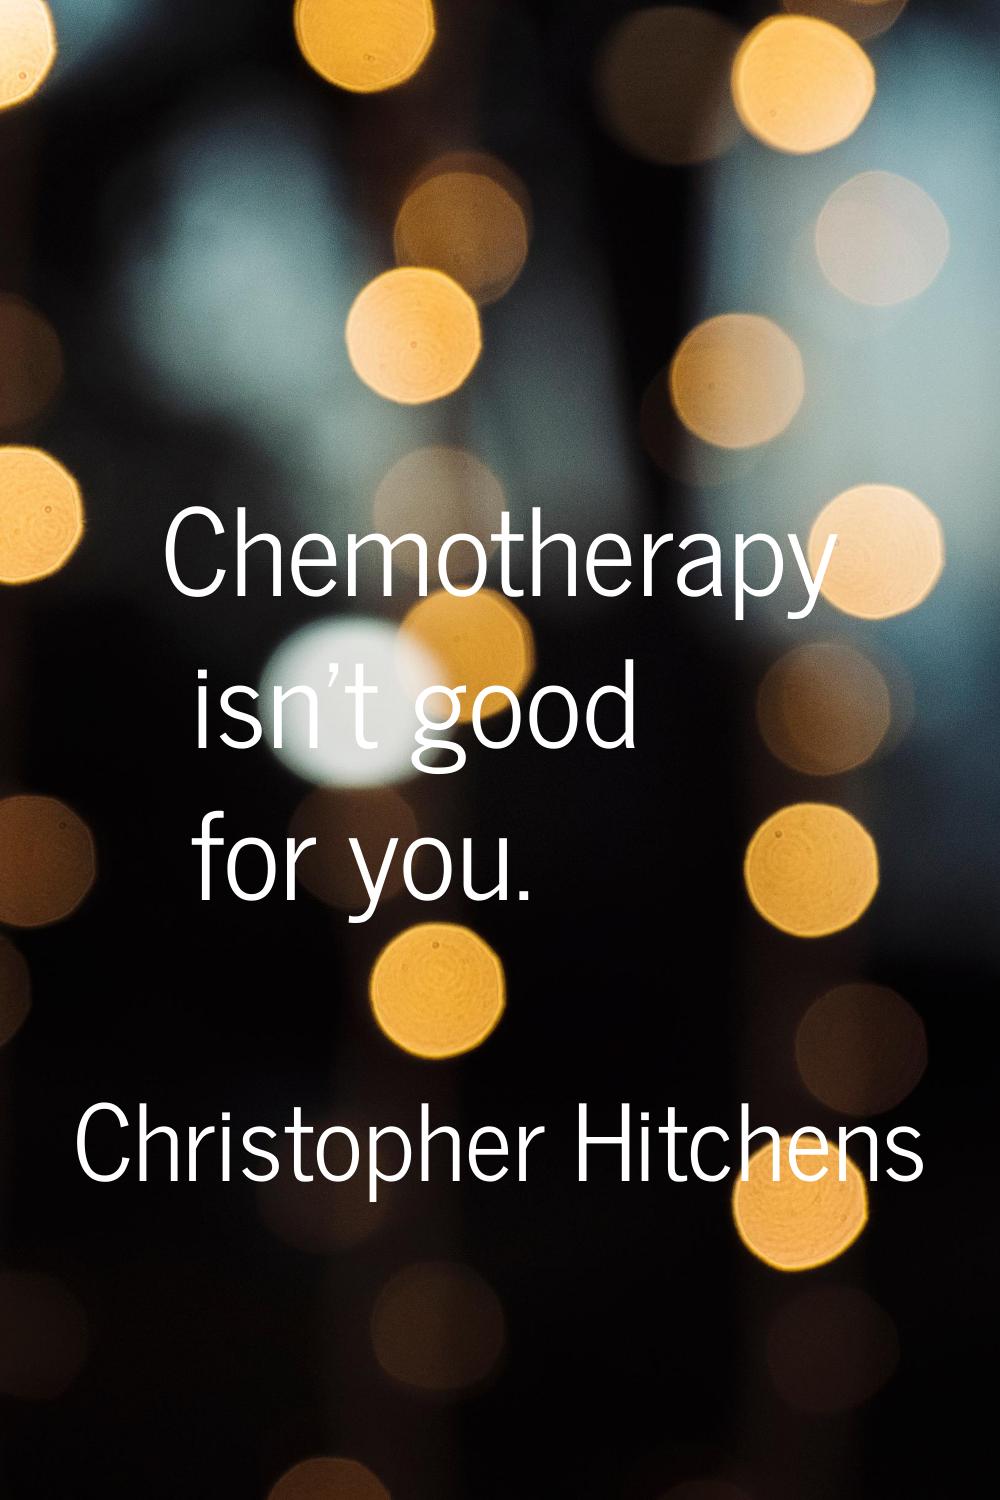 Chemotherapy isn't good for you.